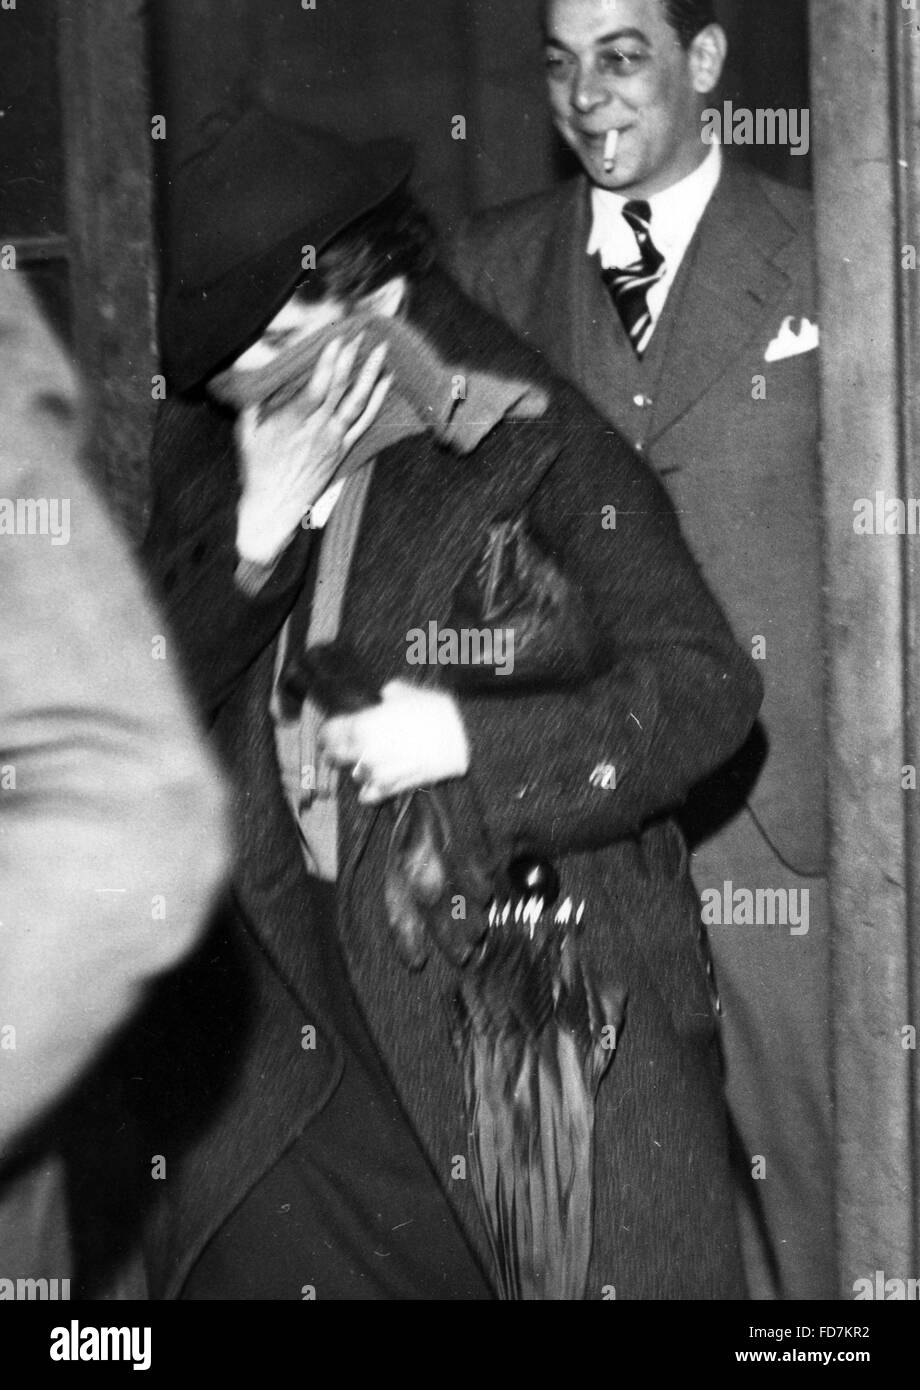 The Cagoule conspiracy in Paris, 1937 Stock Photo